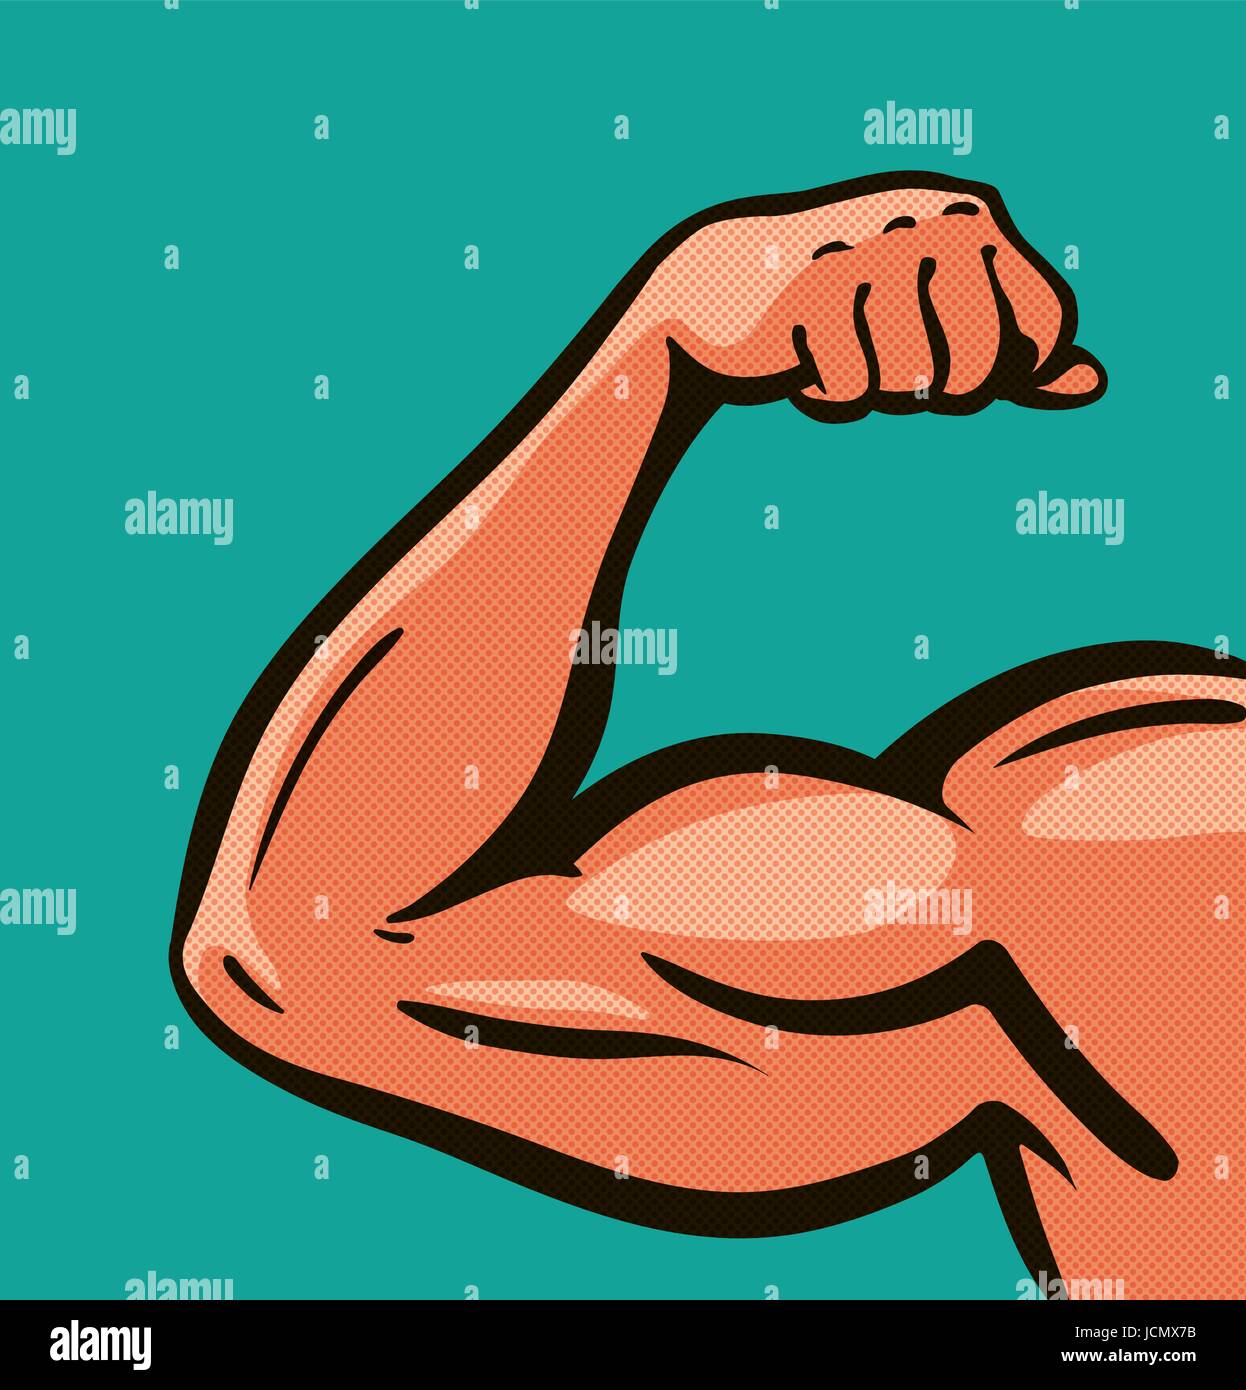 406,596 Strong Arm Images, Stock Photos, 3D objects, & Vectors